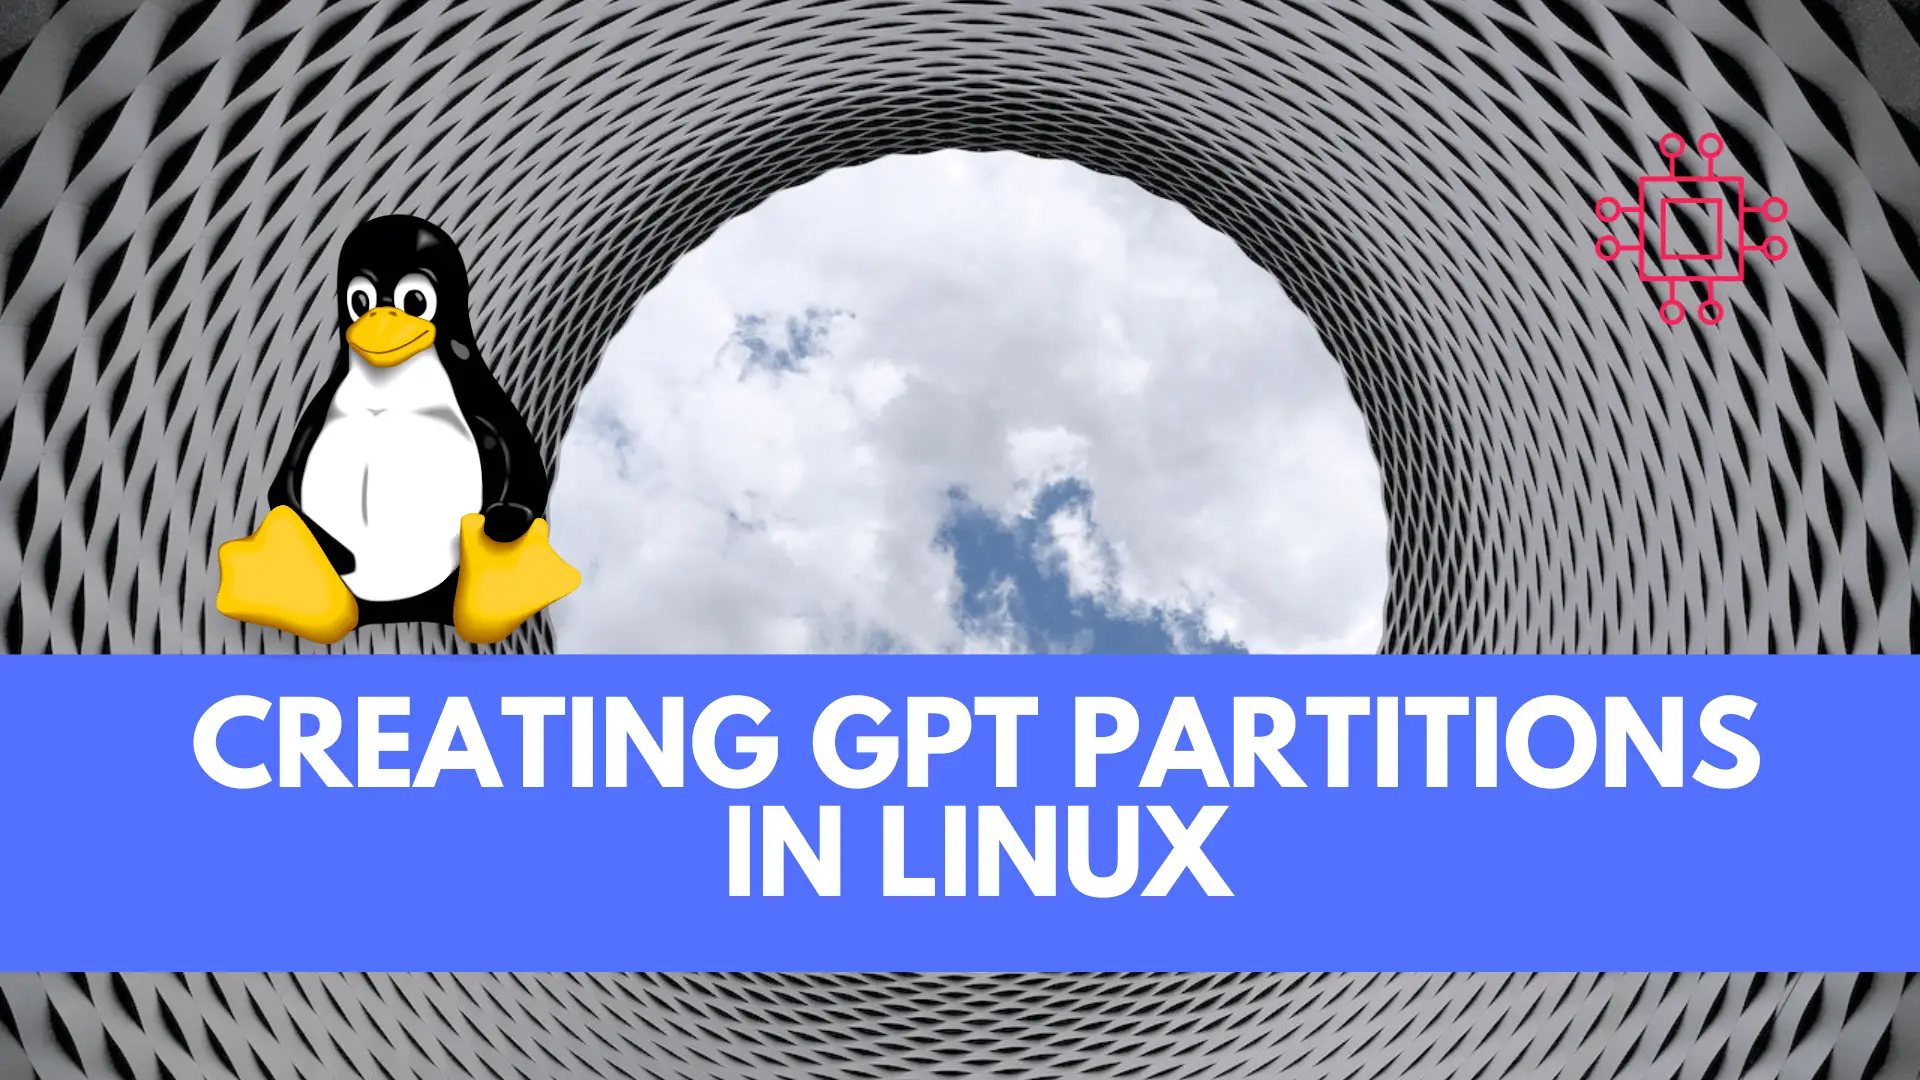 Creating GPT partitions in Linux